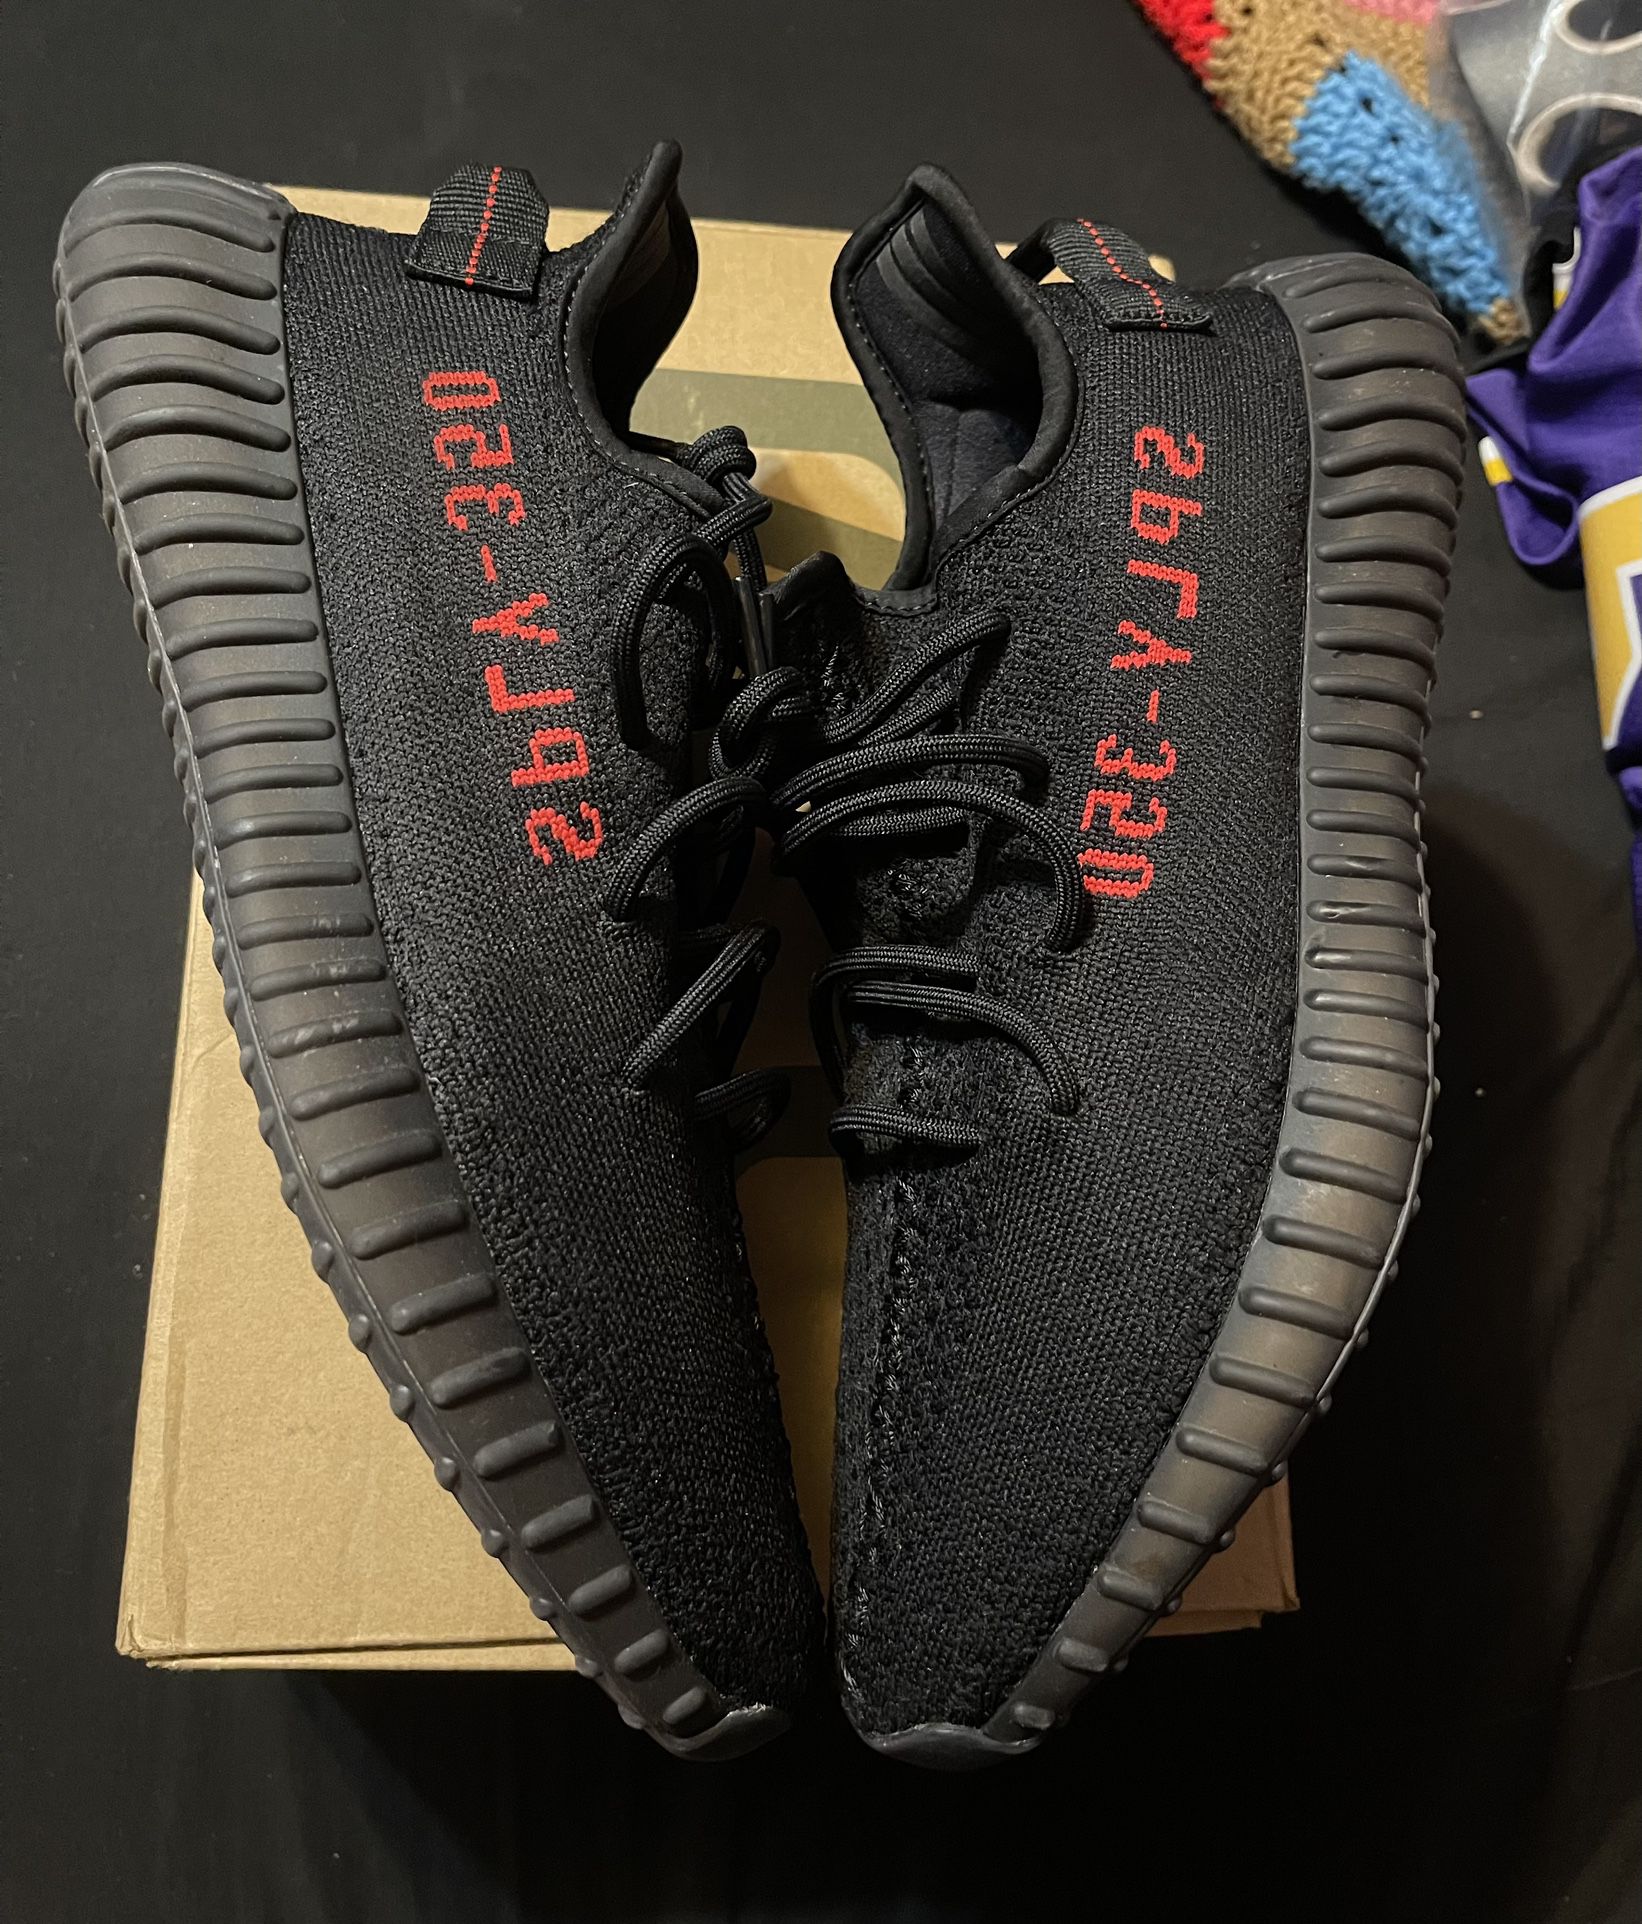 Yeezy 350 V2 Bred for Sale in Montville, CT - OfferUp